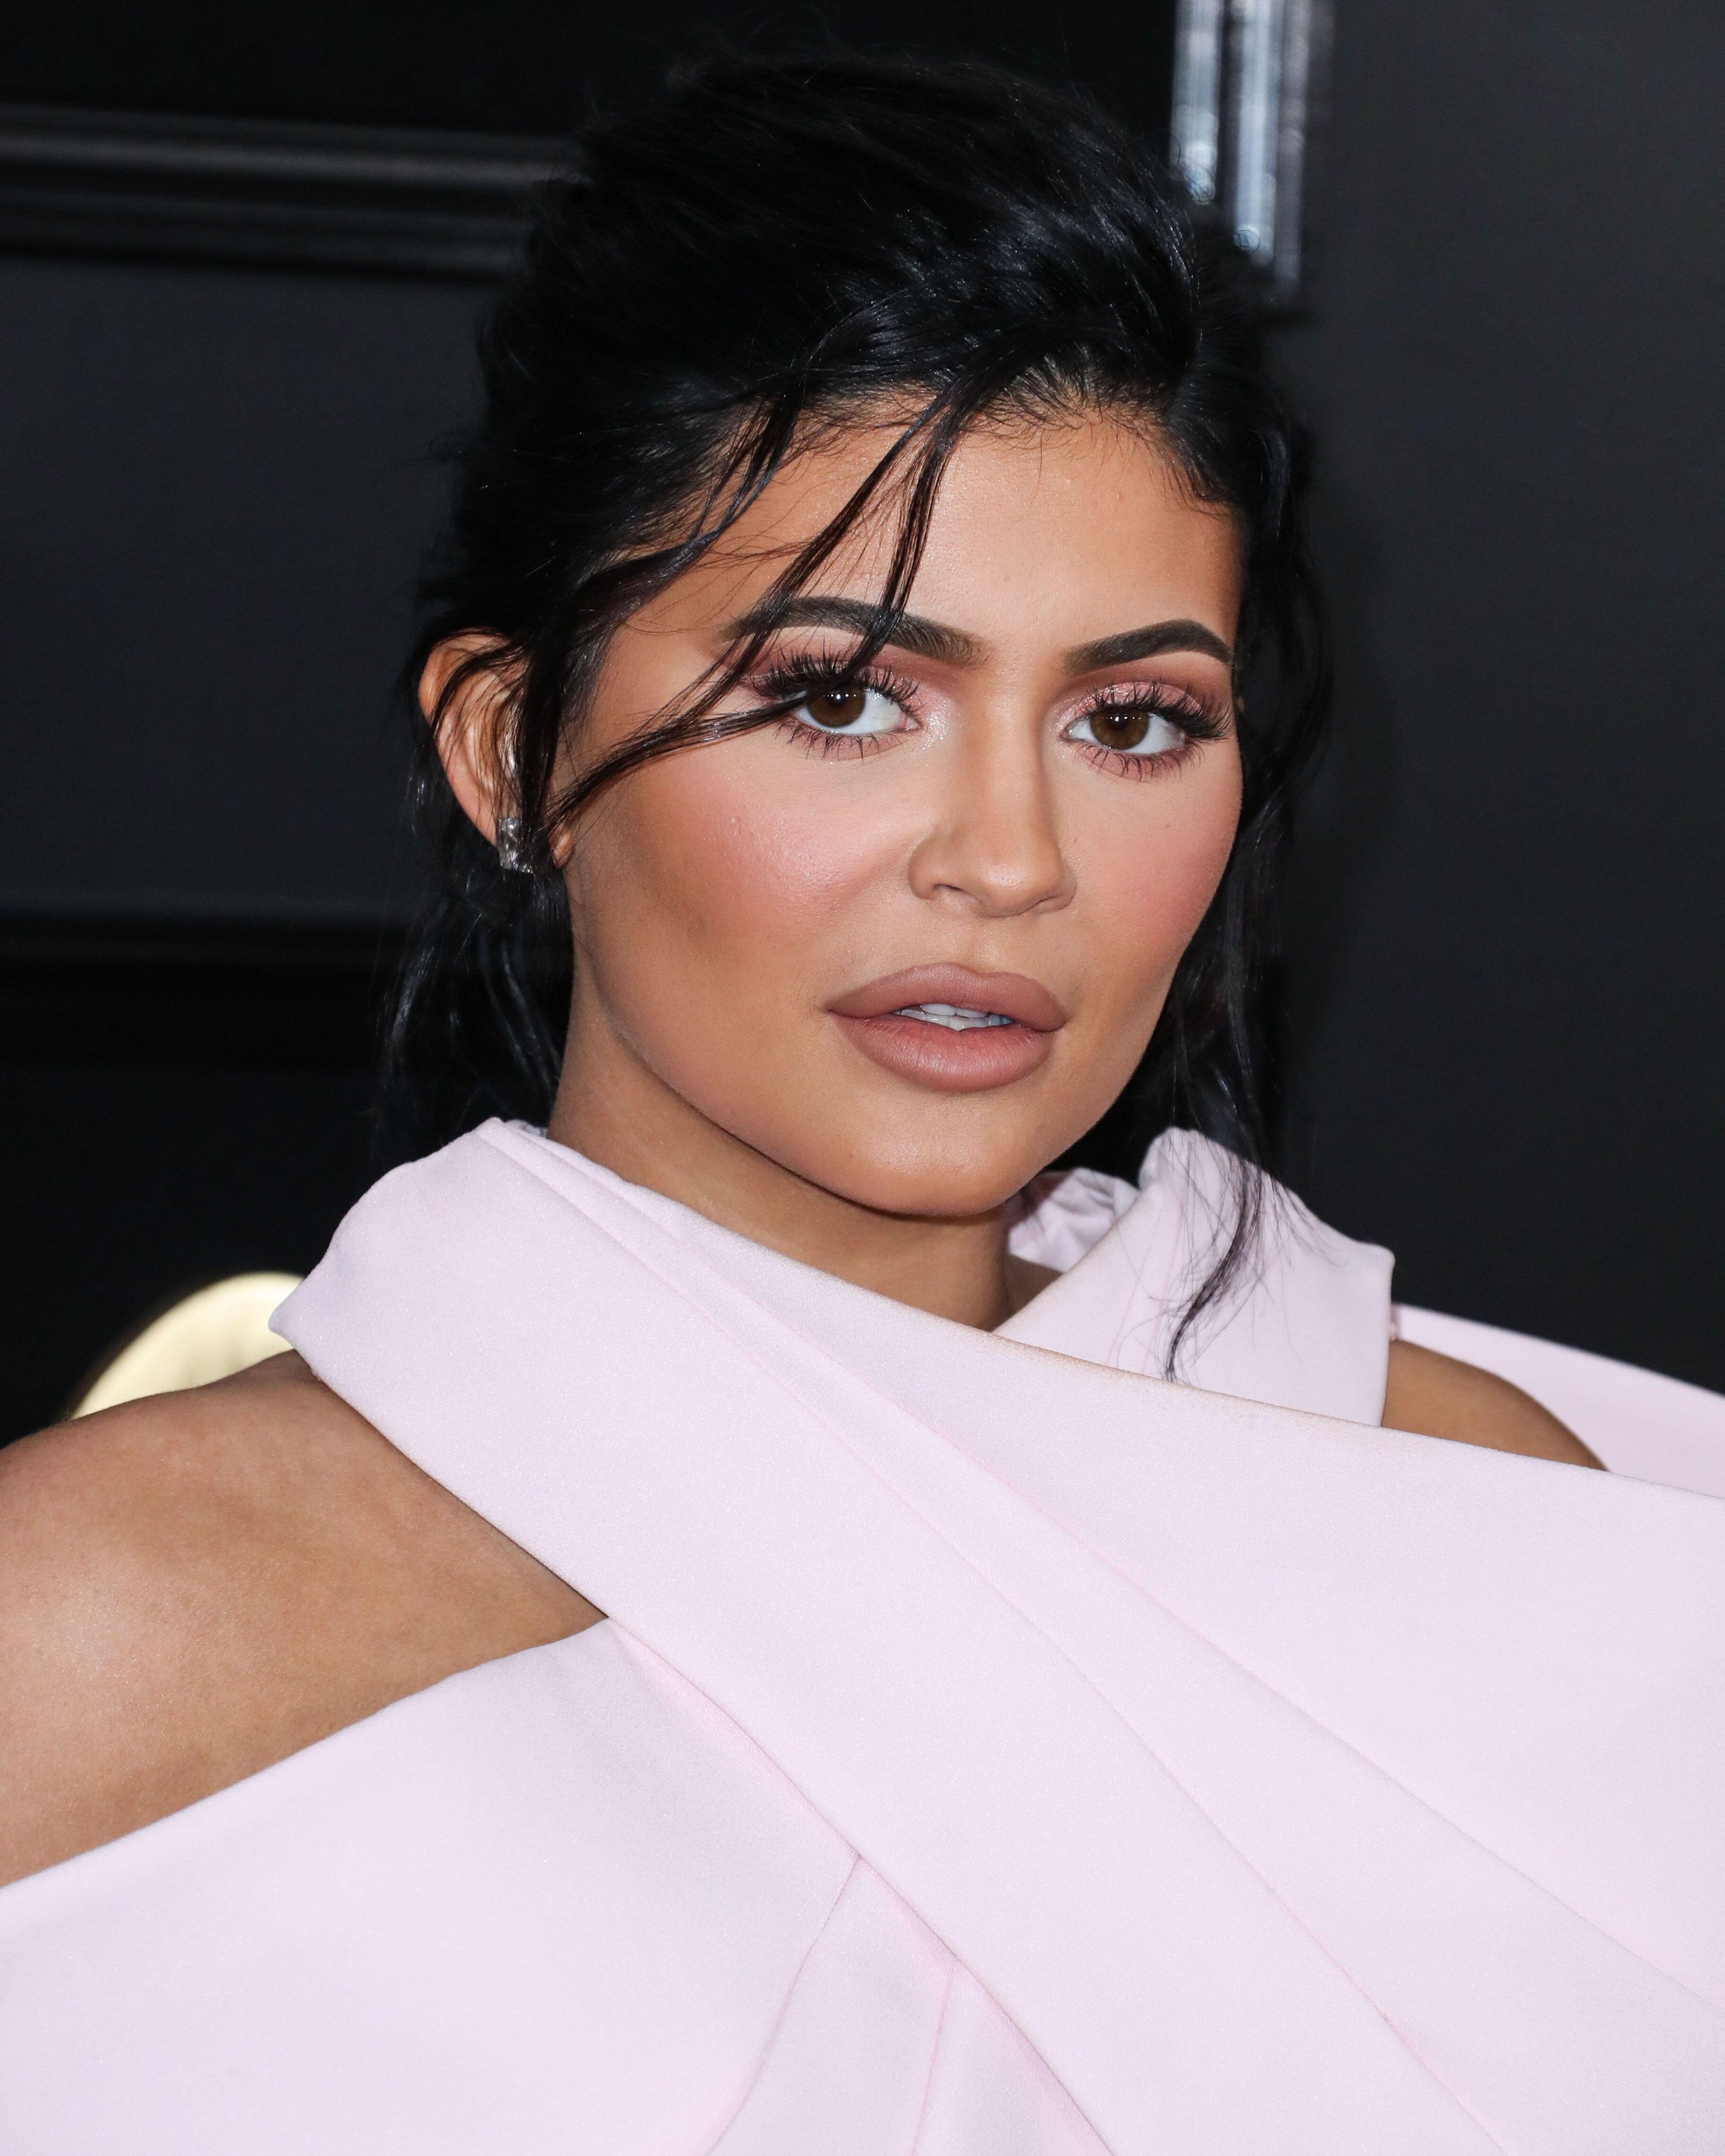 Kylie's (seen here in 2019) lower facial work is less extreme than that of her sister, Kim Kardashian, said Dr. Richard Westreich